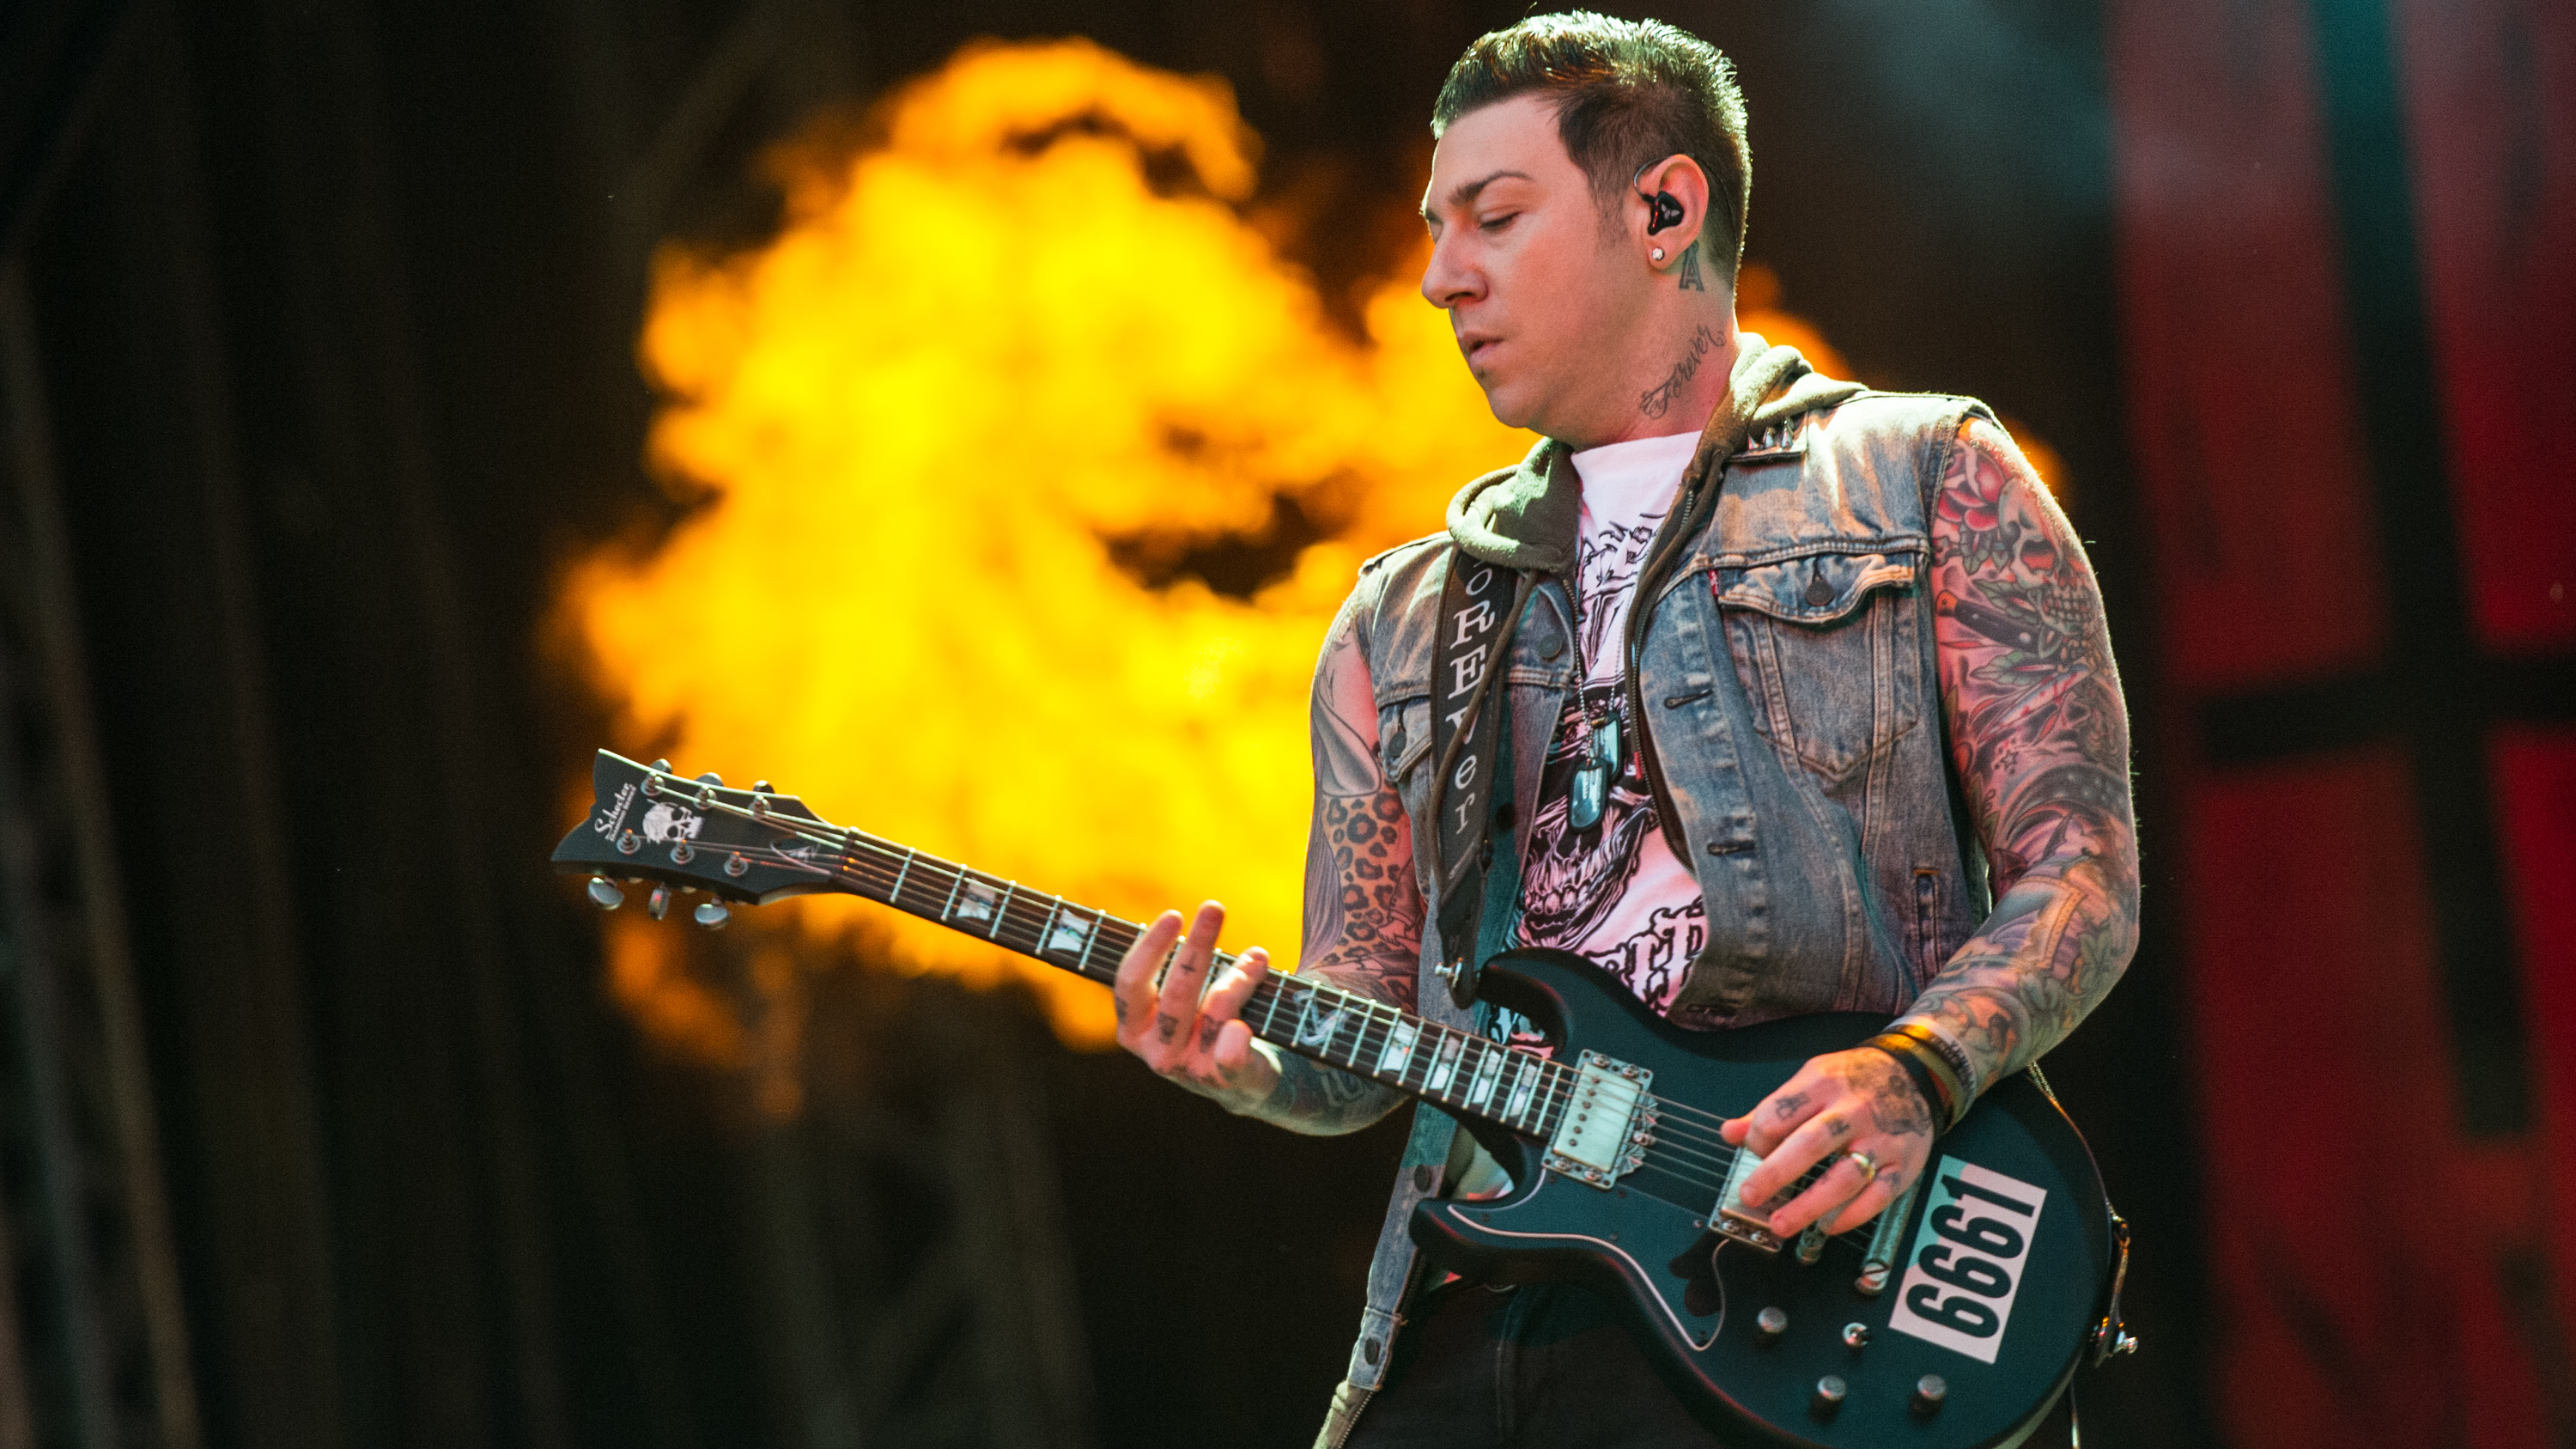 AVENGED SEVENFOLD tour kickoff show in L.A.: See setlist and videos